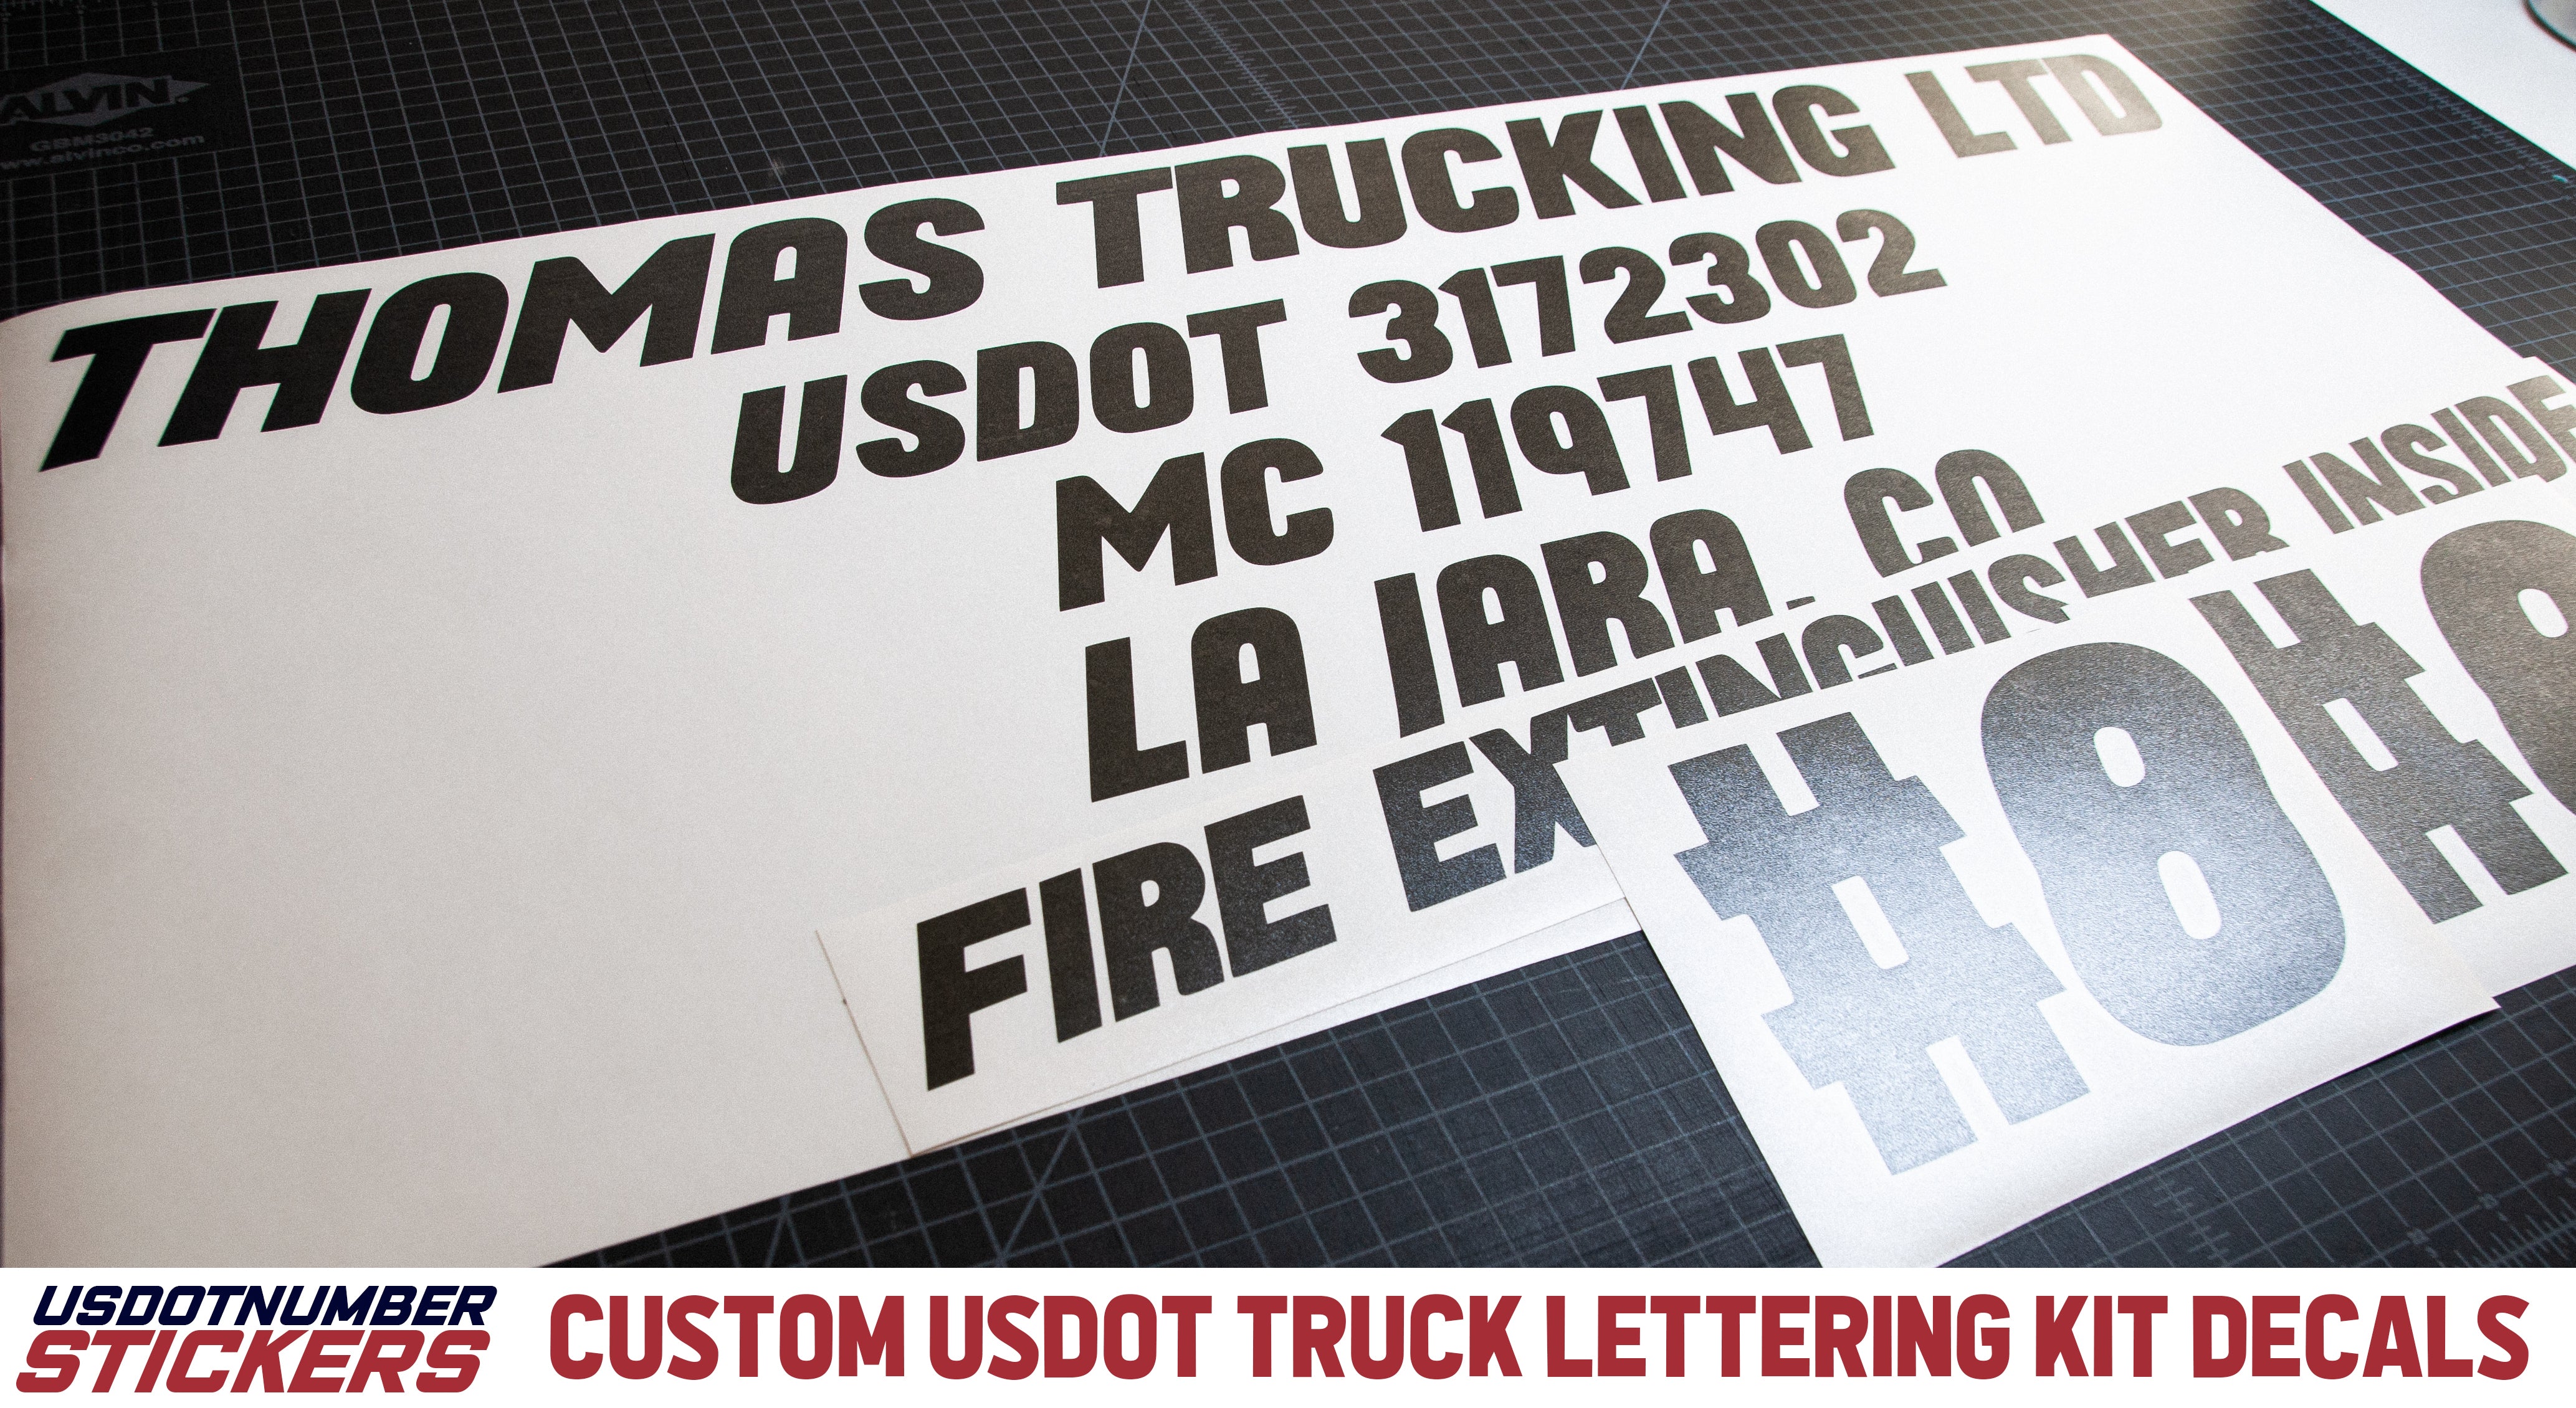 usdot number decal sticker lettering kits